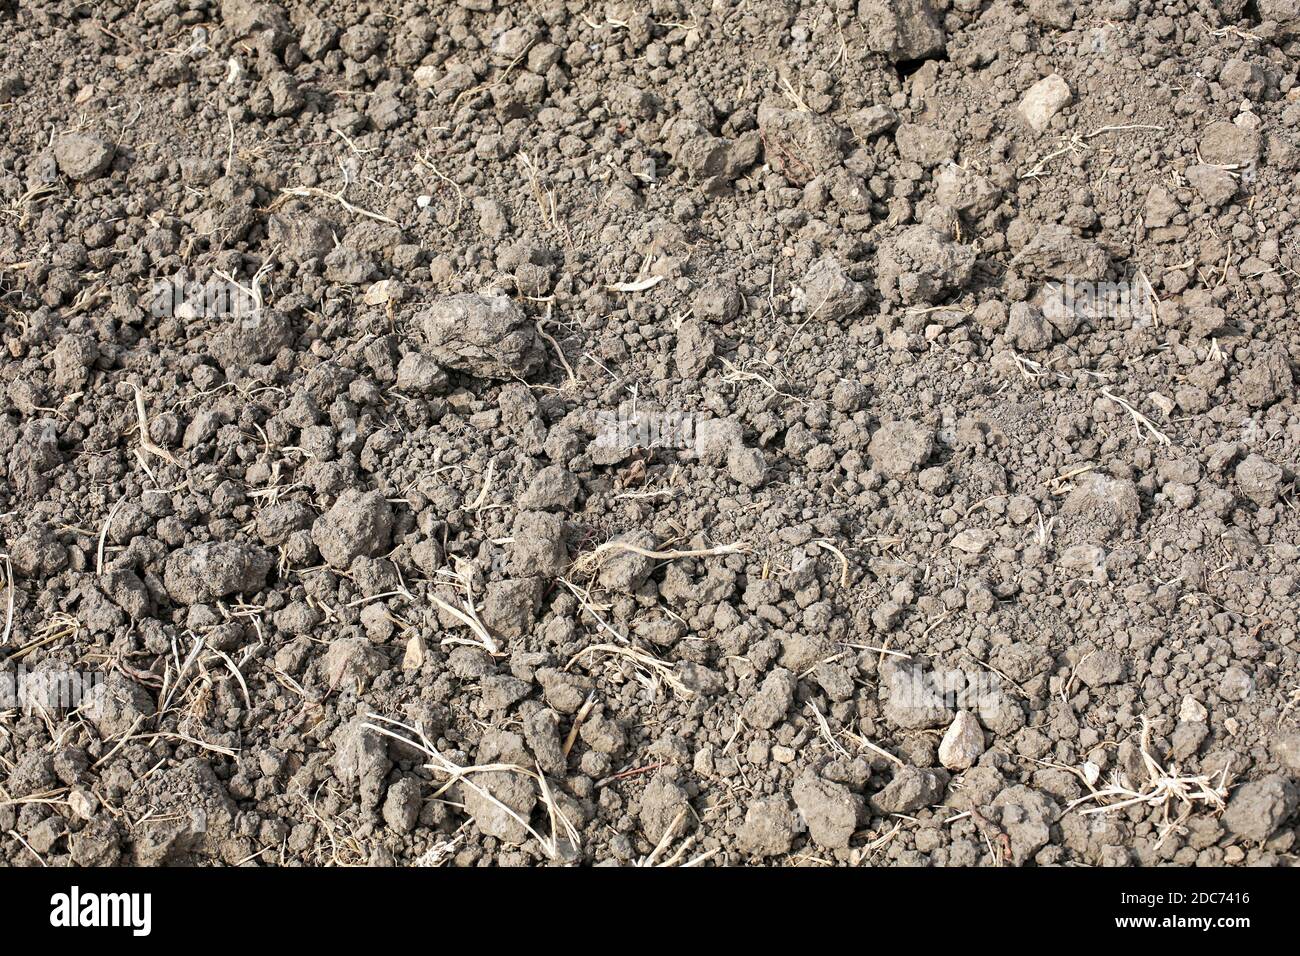 Freshly tilled soil in an agricultural field Stock Photo